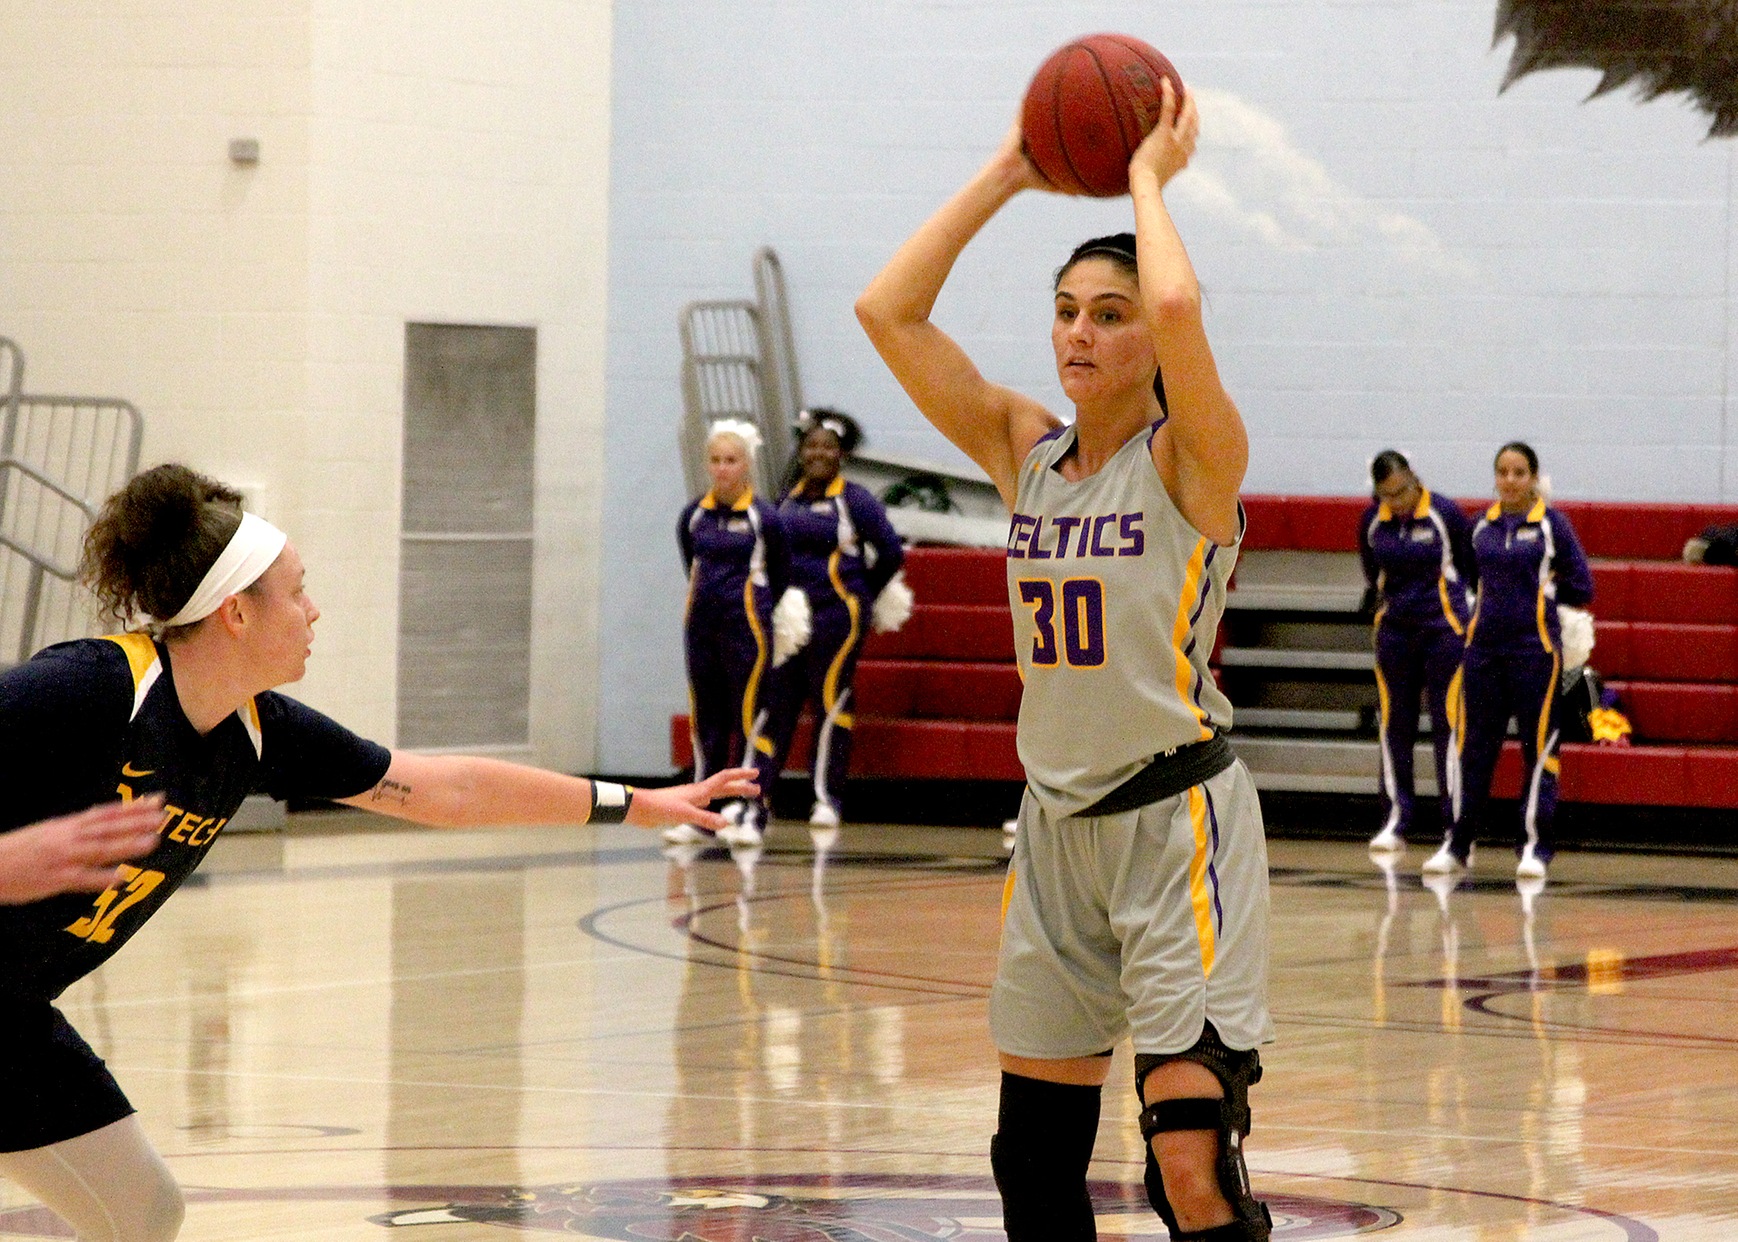 NAIA Division II Women's Basketball National Player of the Week - No. 3